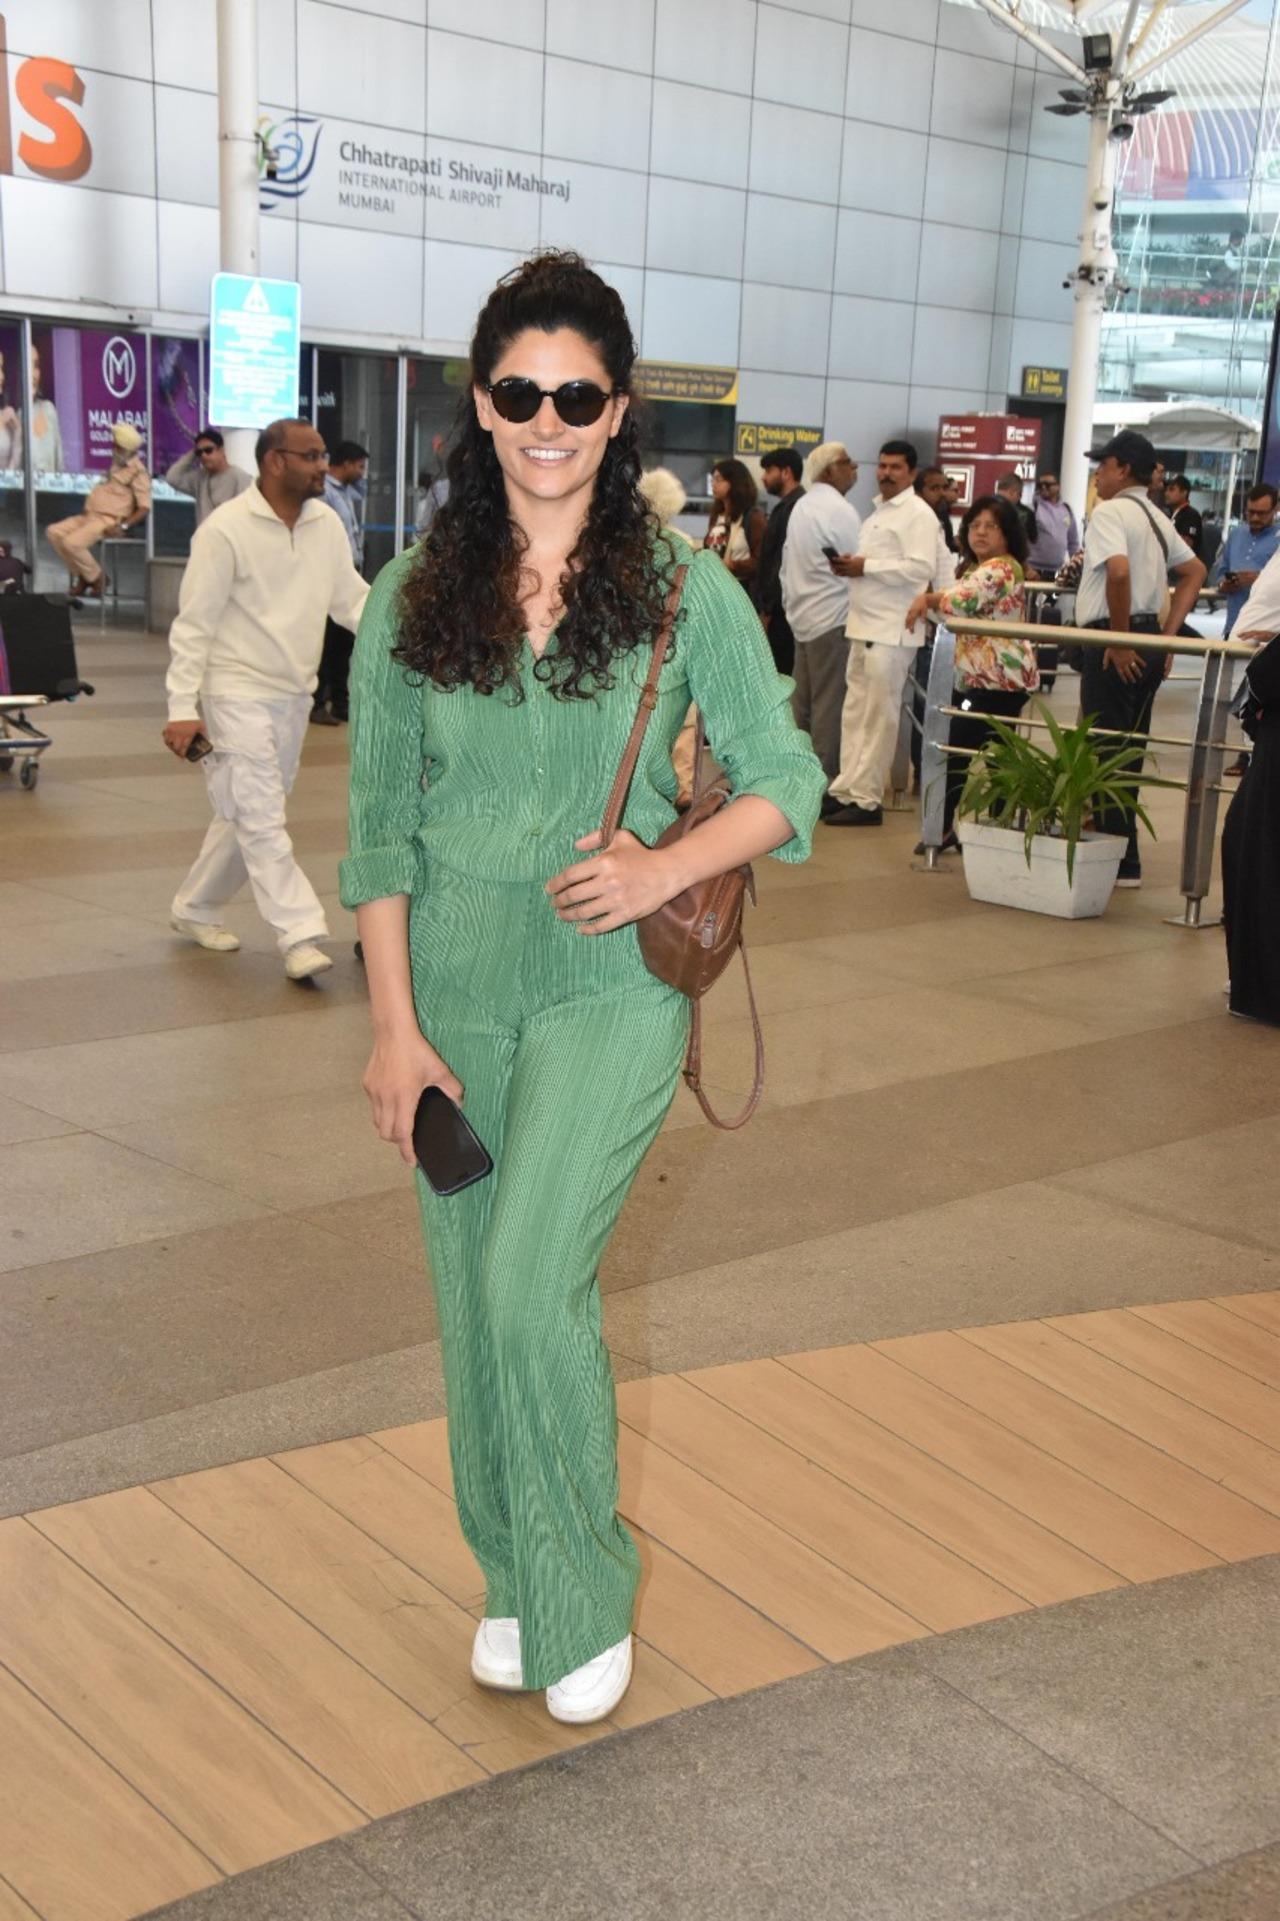 Actress Saiyami Kher returned to Mumbai in style on Monday. She wore a light green dress and white sneakers to complete her elegant appearance. She also carried a brown purse